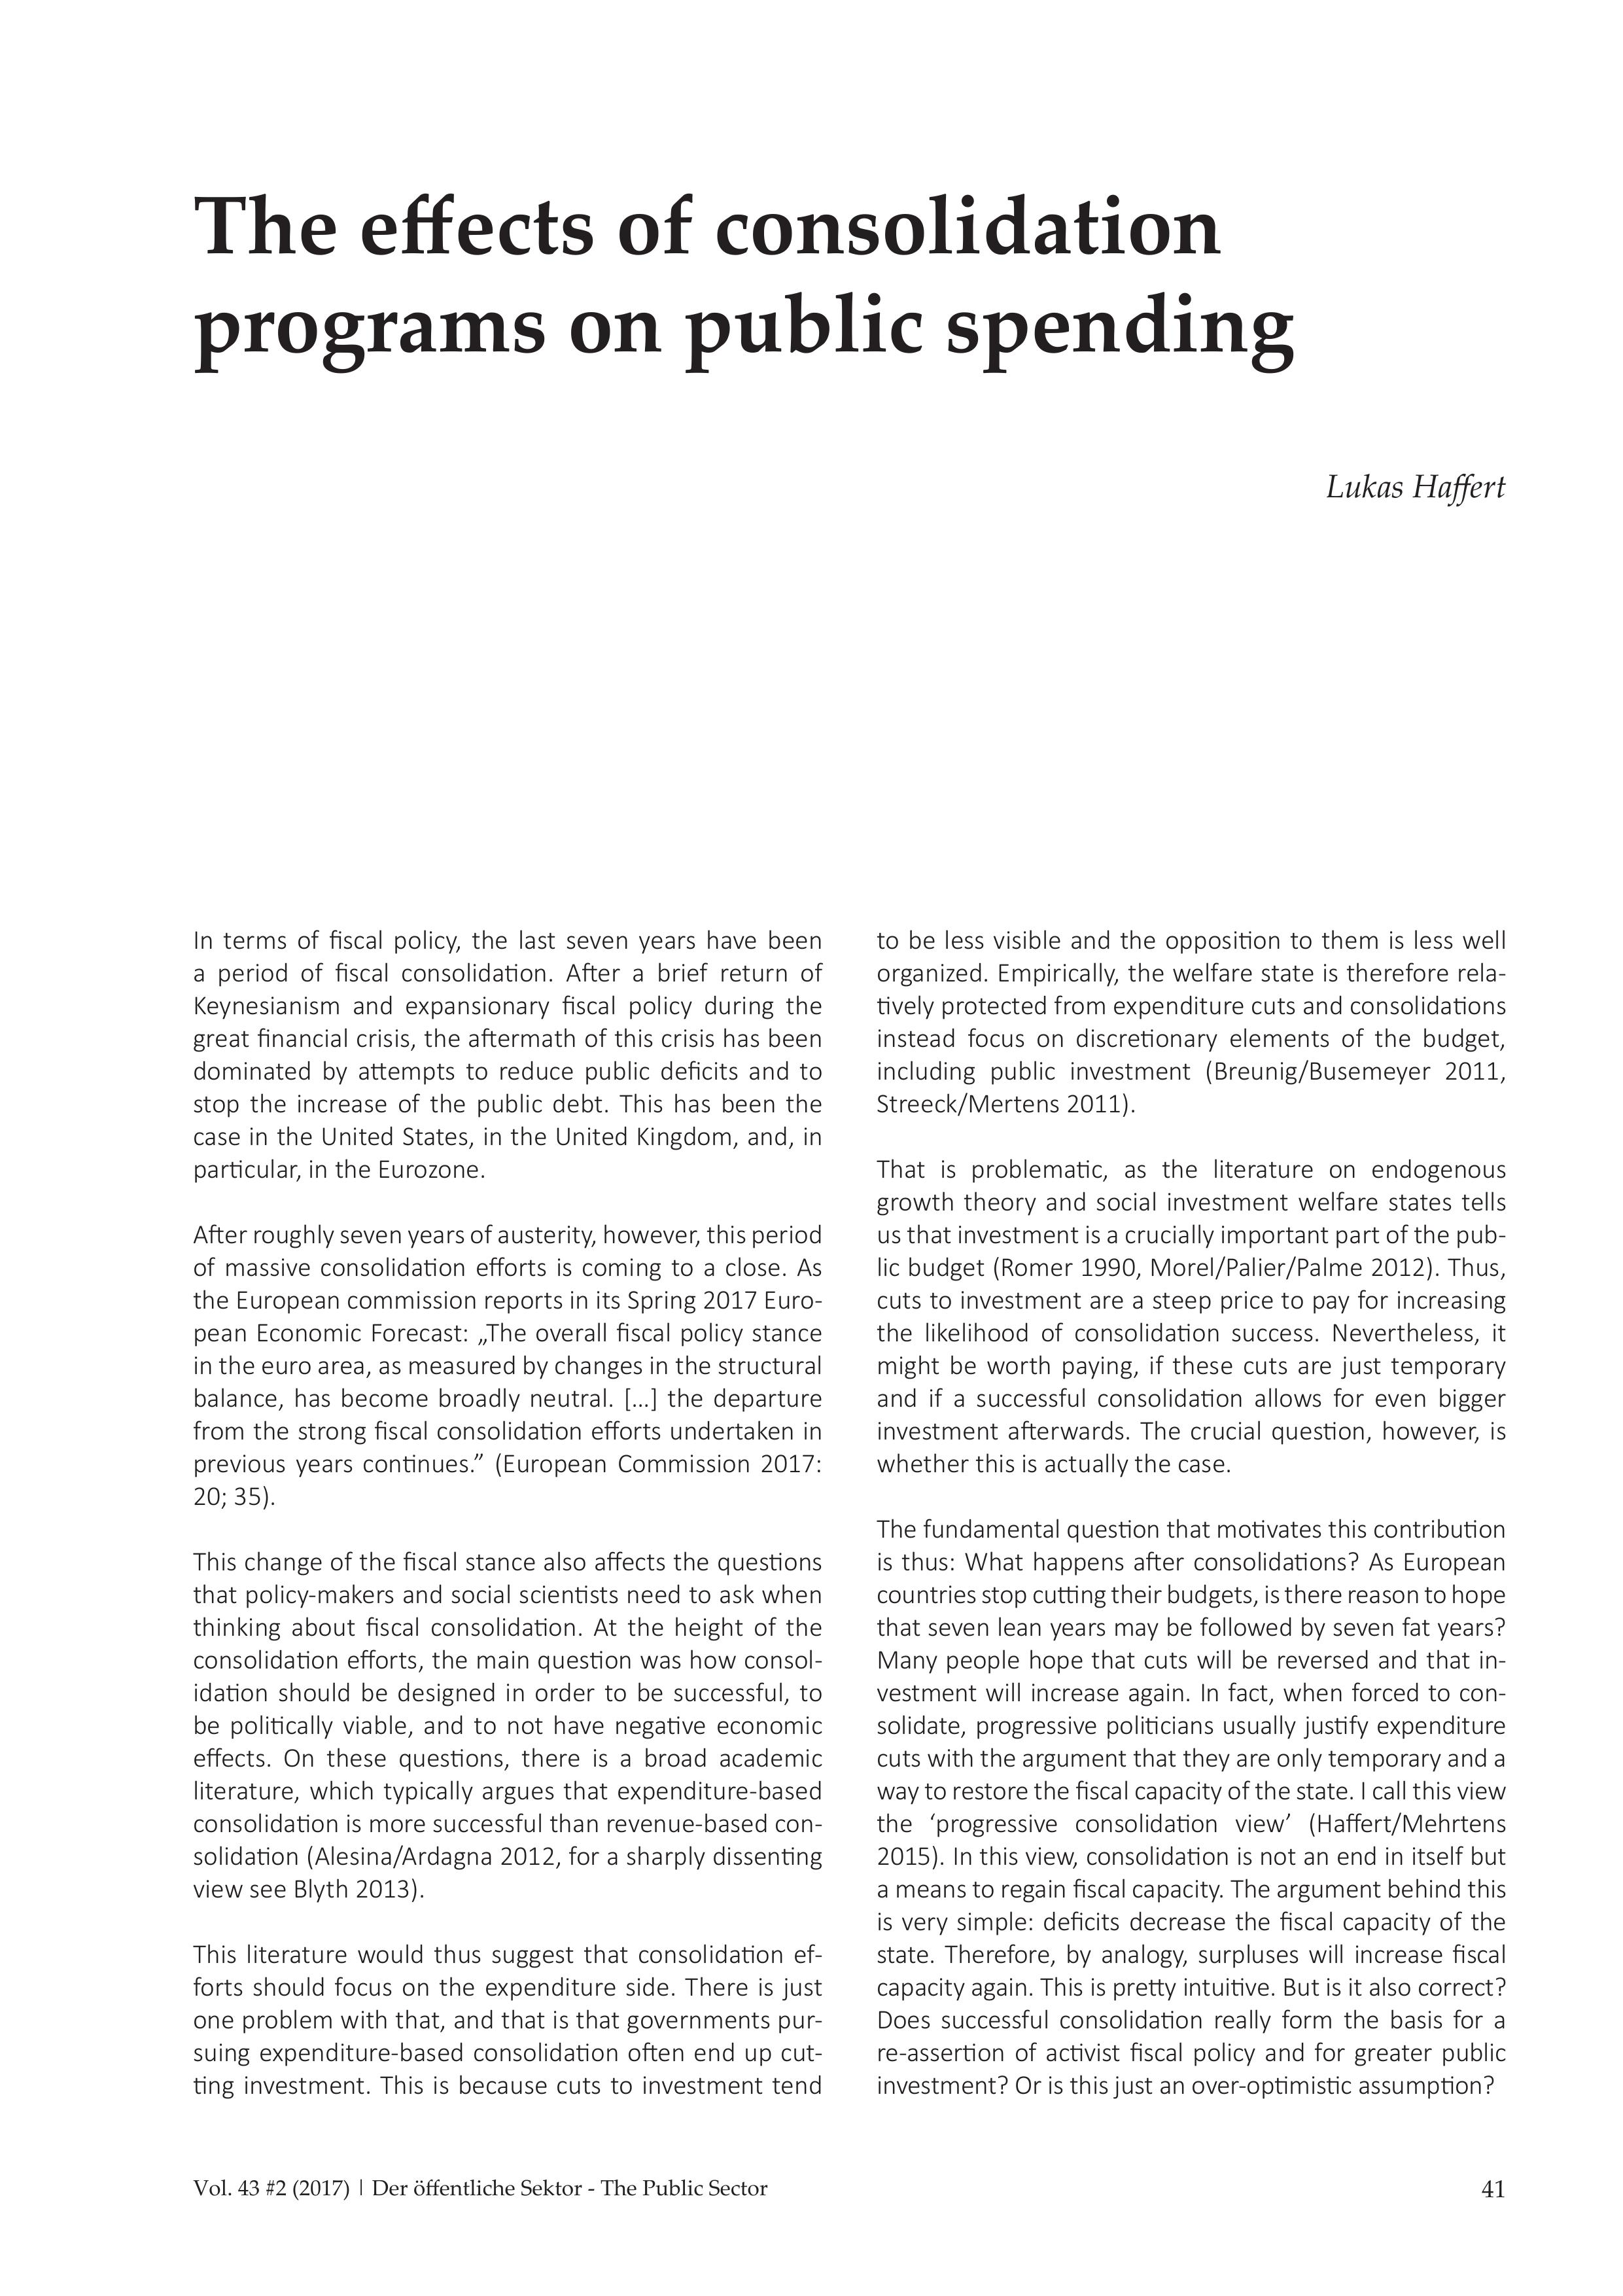 The effects of consolidation programs on public spending